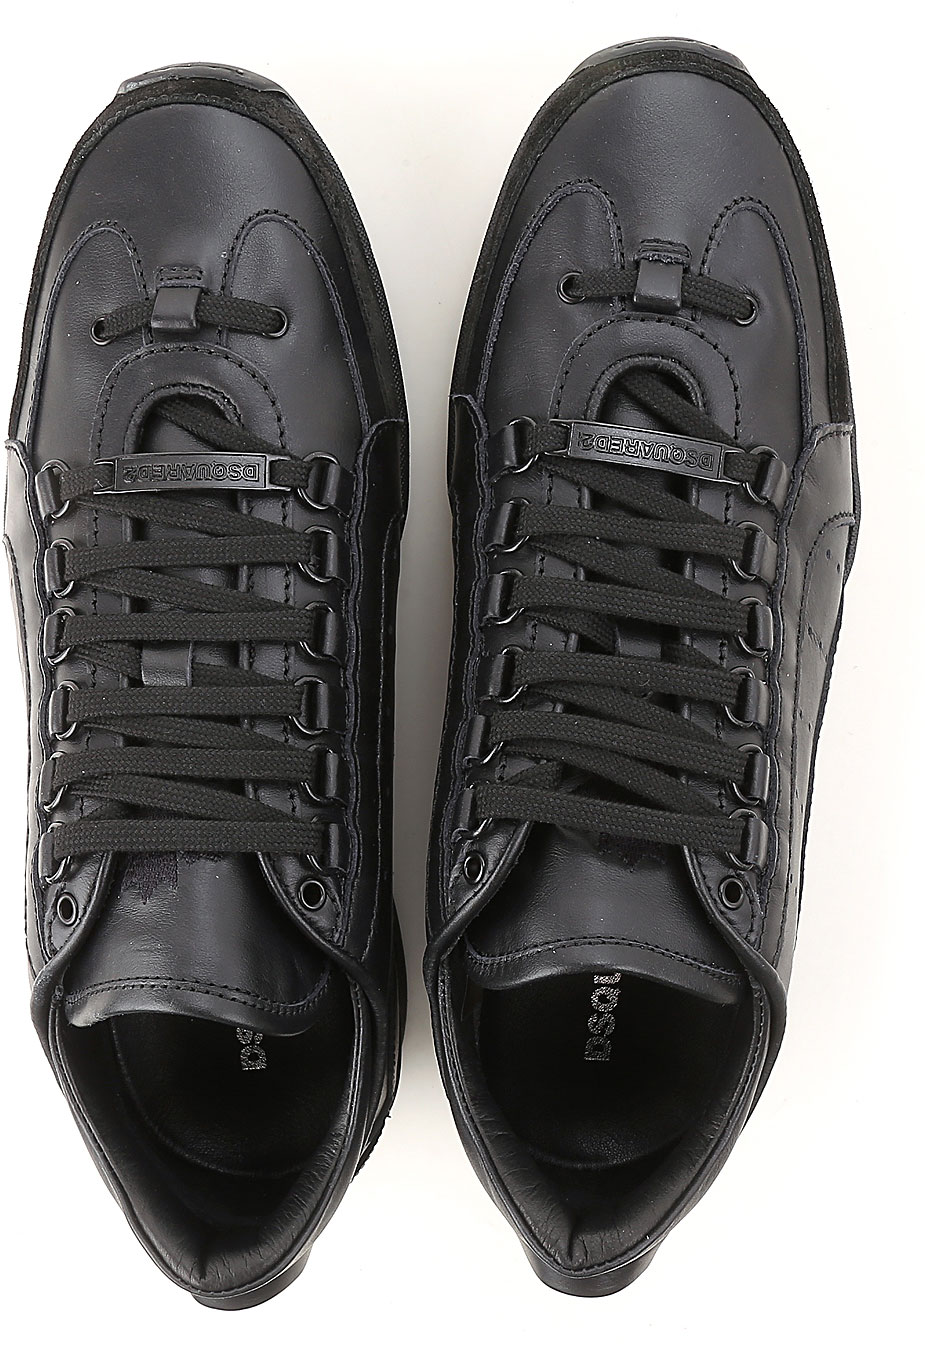 Mens Shoes Dsquared2, Style code: snm0404-06500001-m084